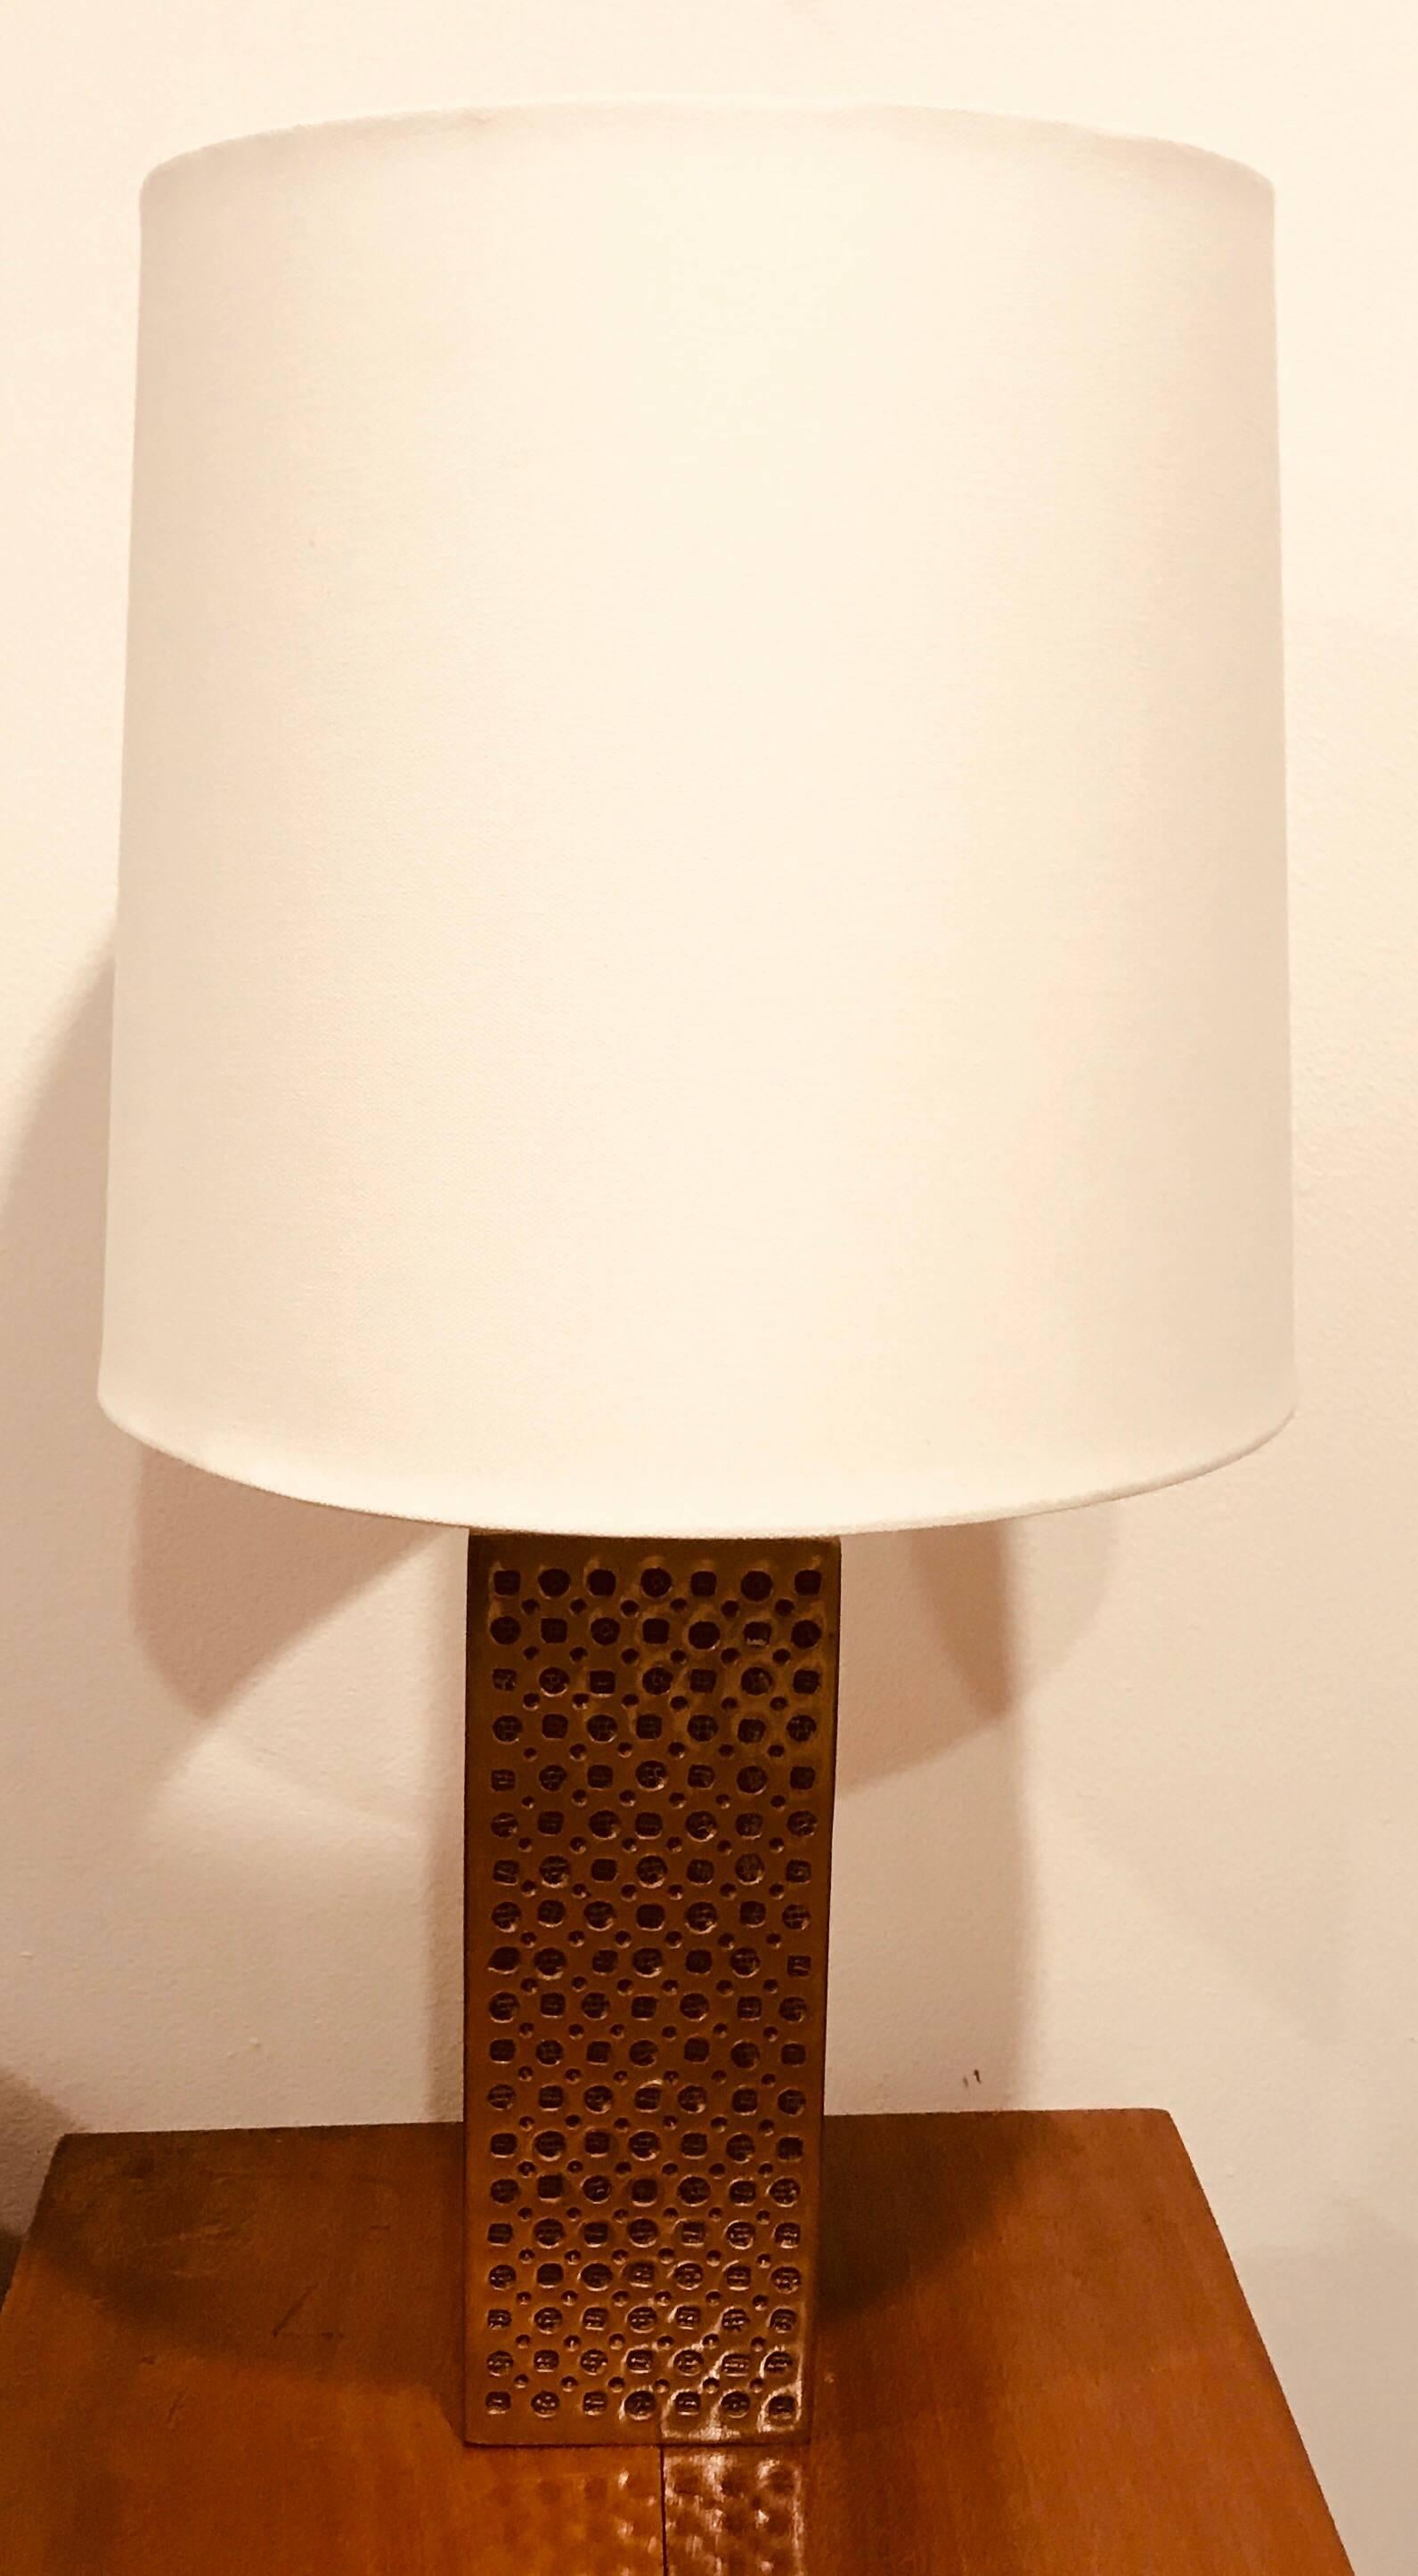 A handcrafted Italian bronze column table lamp with an inset geometric pattern designed by Italian designer, Luciano Frigerio. Newly rewired column height is 11.5”.